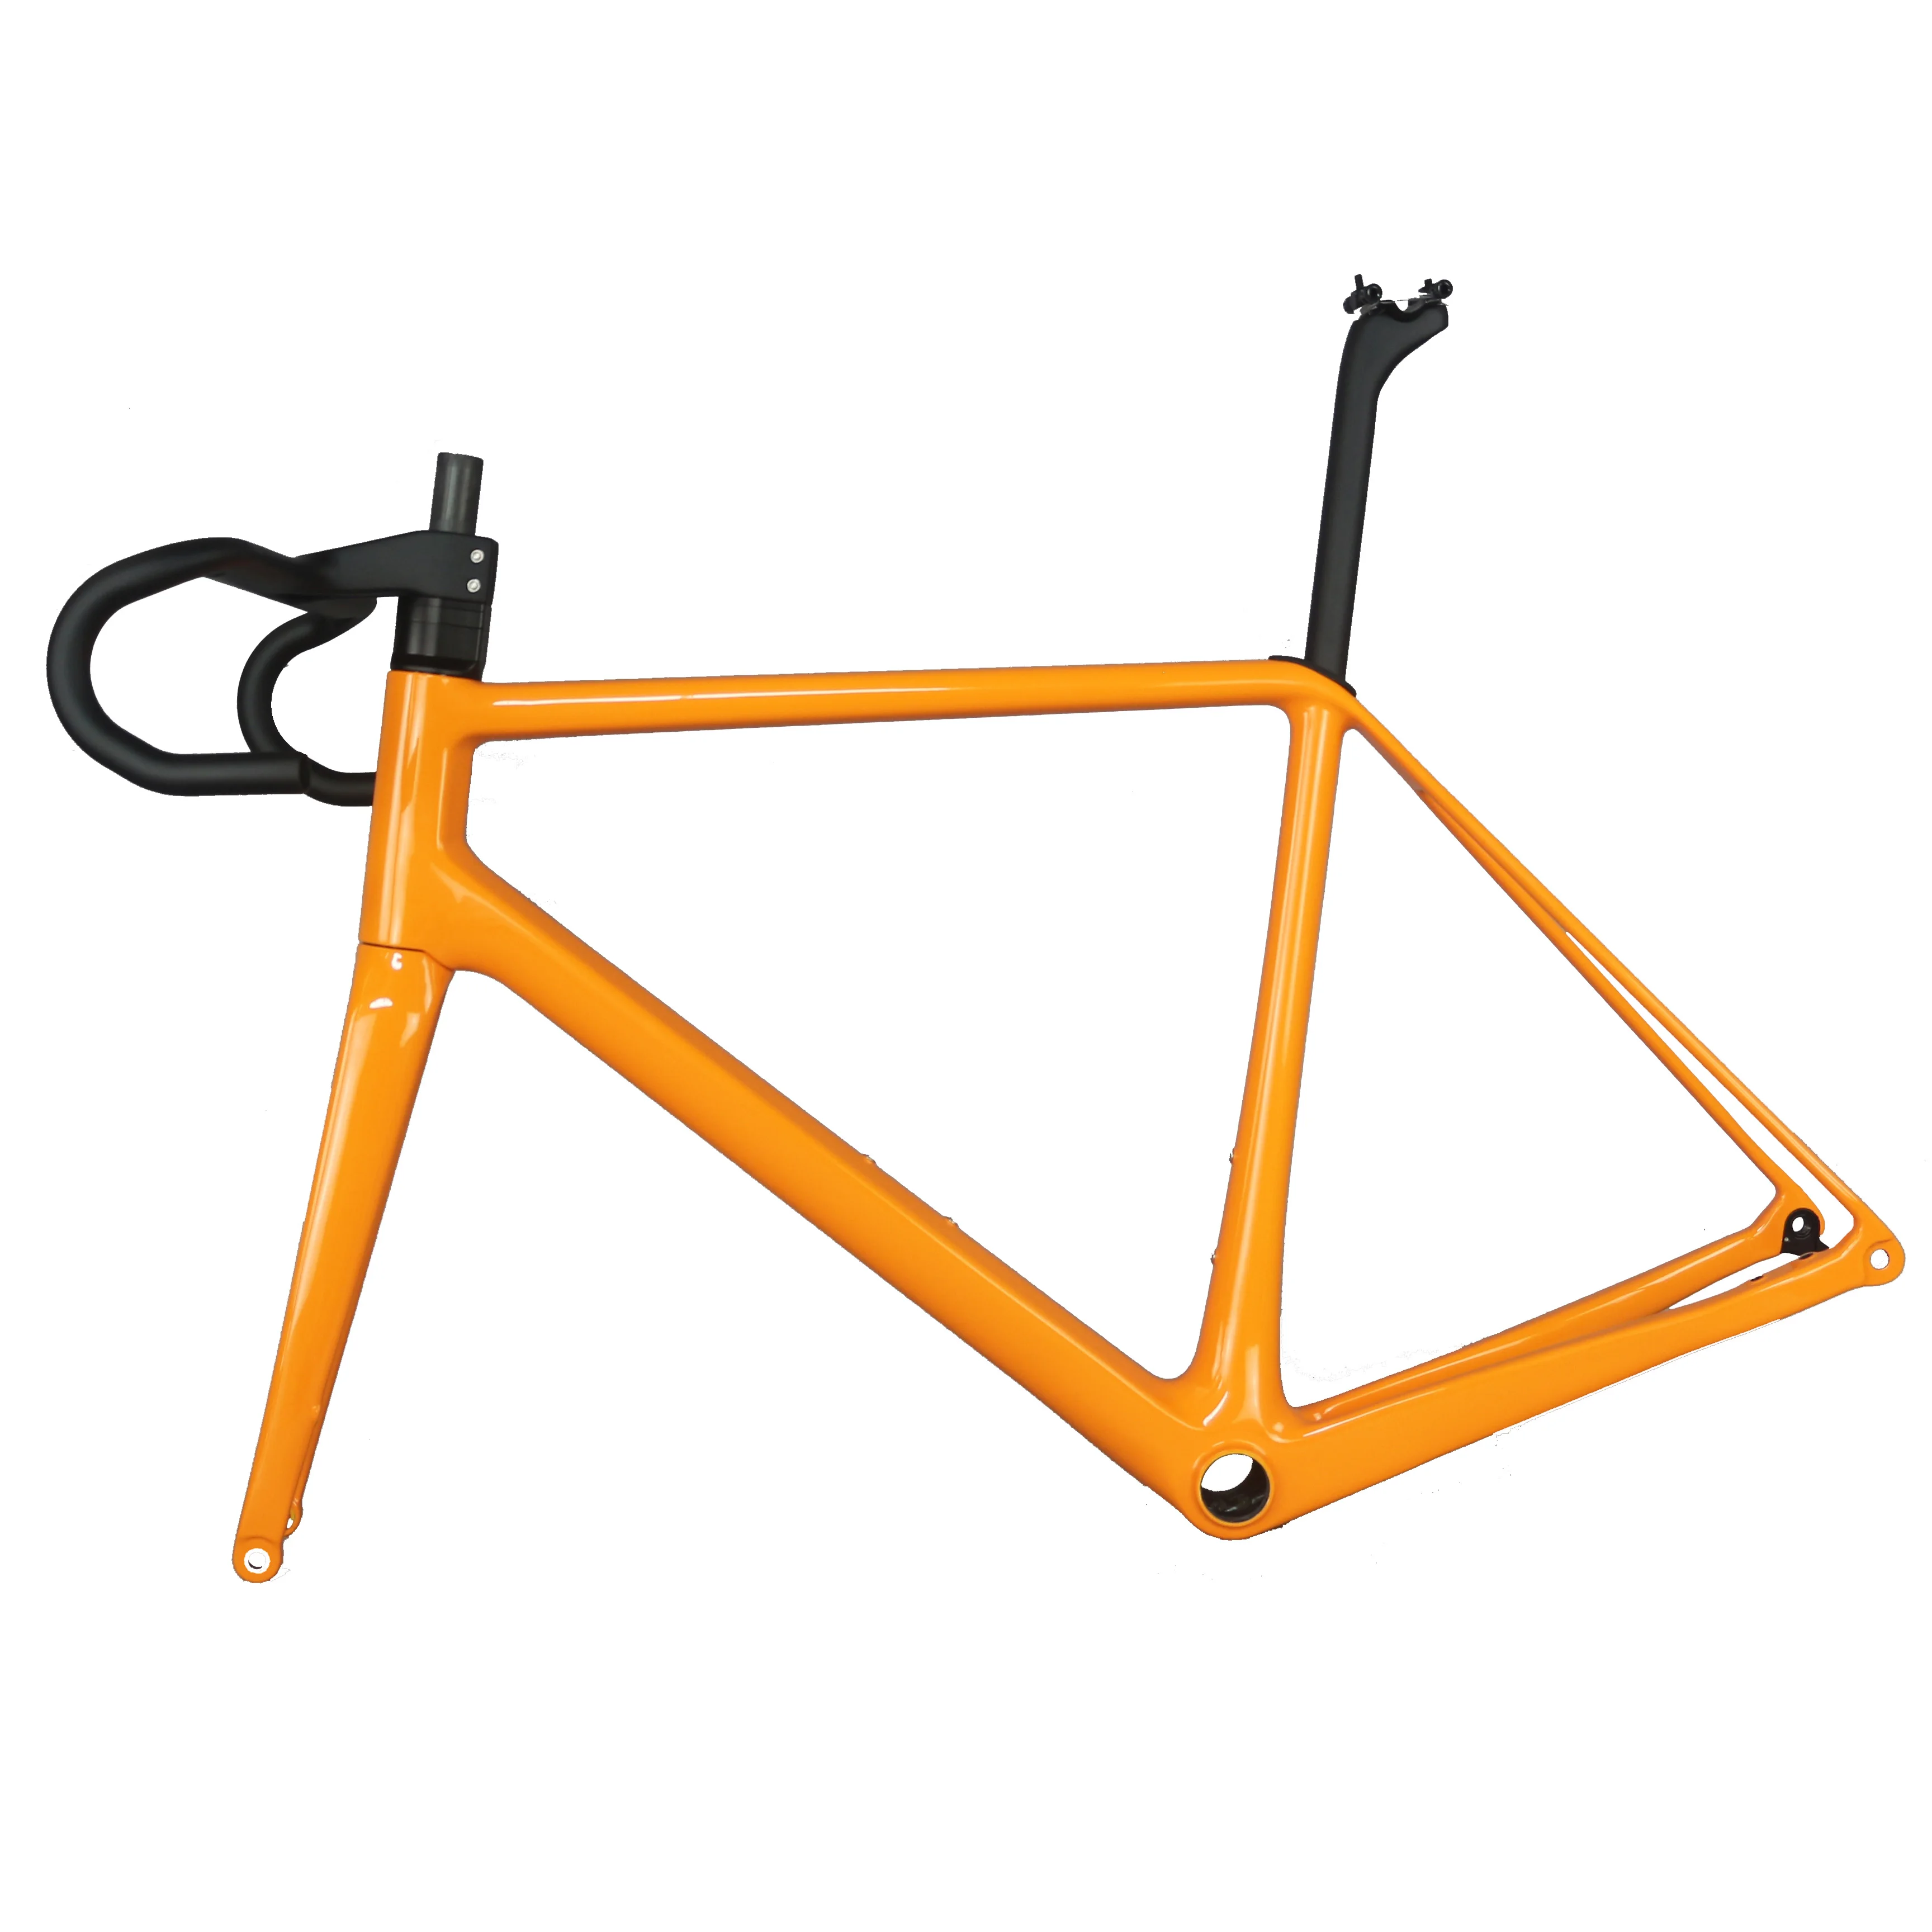 Road Racing Carbon Fiber Chinese Factory Price Full Carbon Cycling Road Bicycle Frames Fm639 Bike Frame Size 50cm 52cm 54cm56cm Buy Road Bicycle Frames Fm639 Carbon Fiber Chinese Factory Price Full Carbon Cycling Road